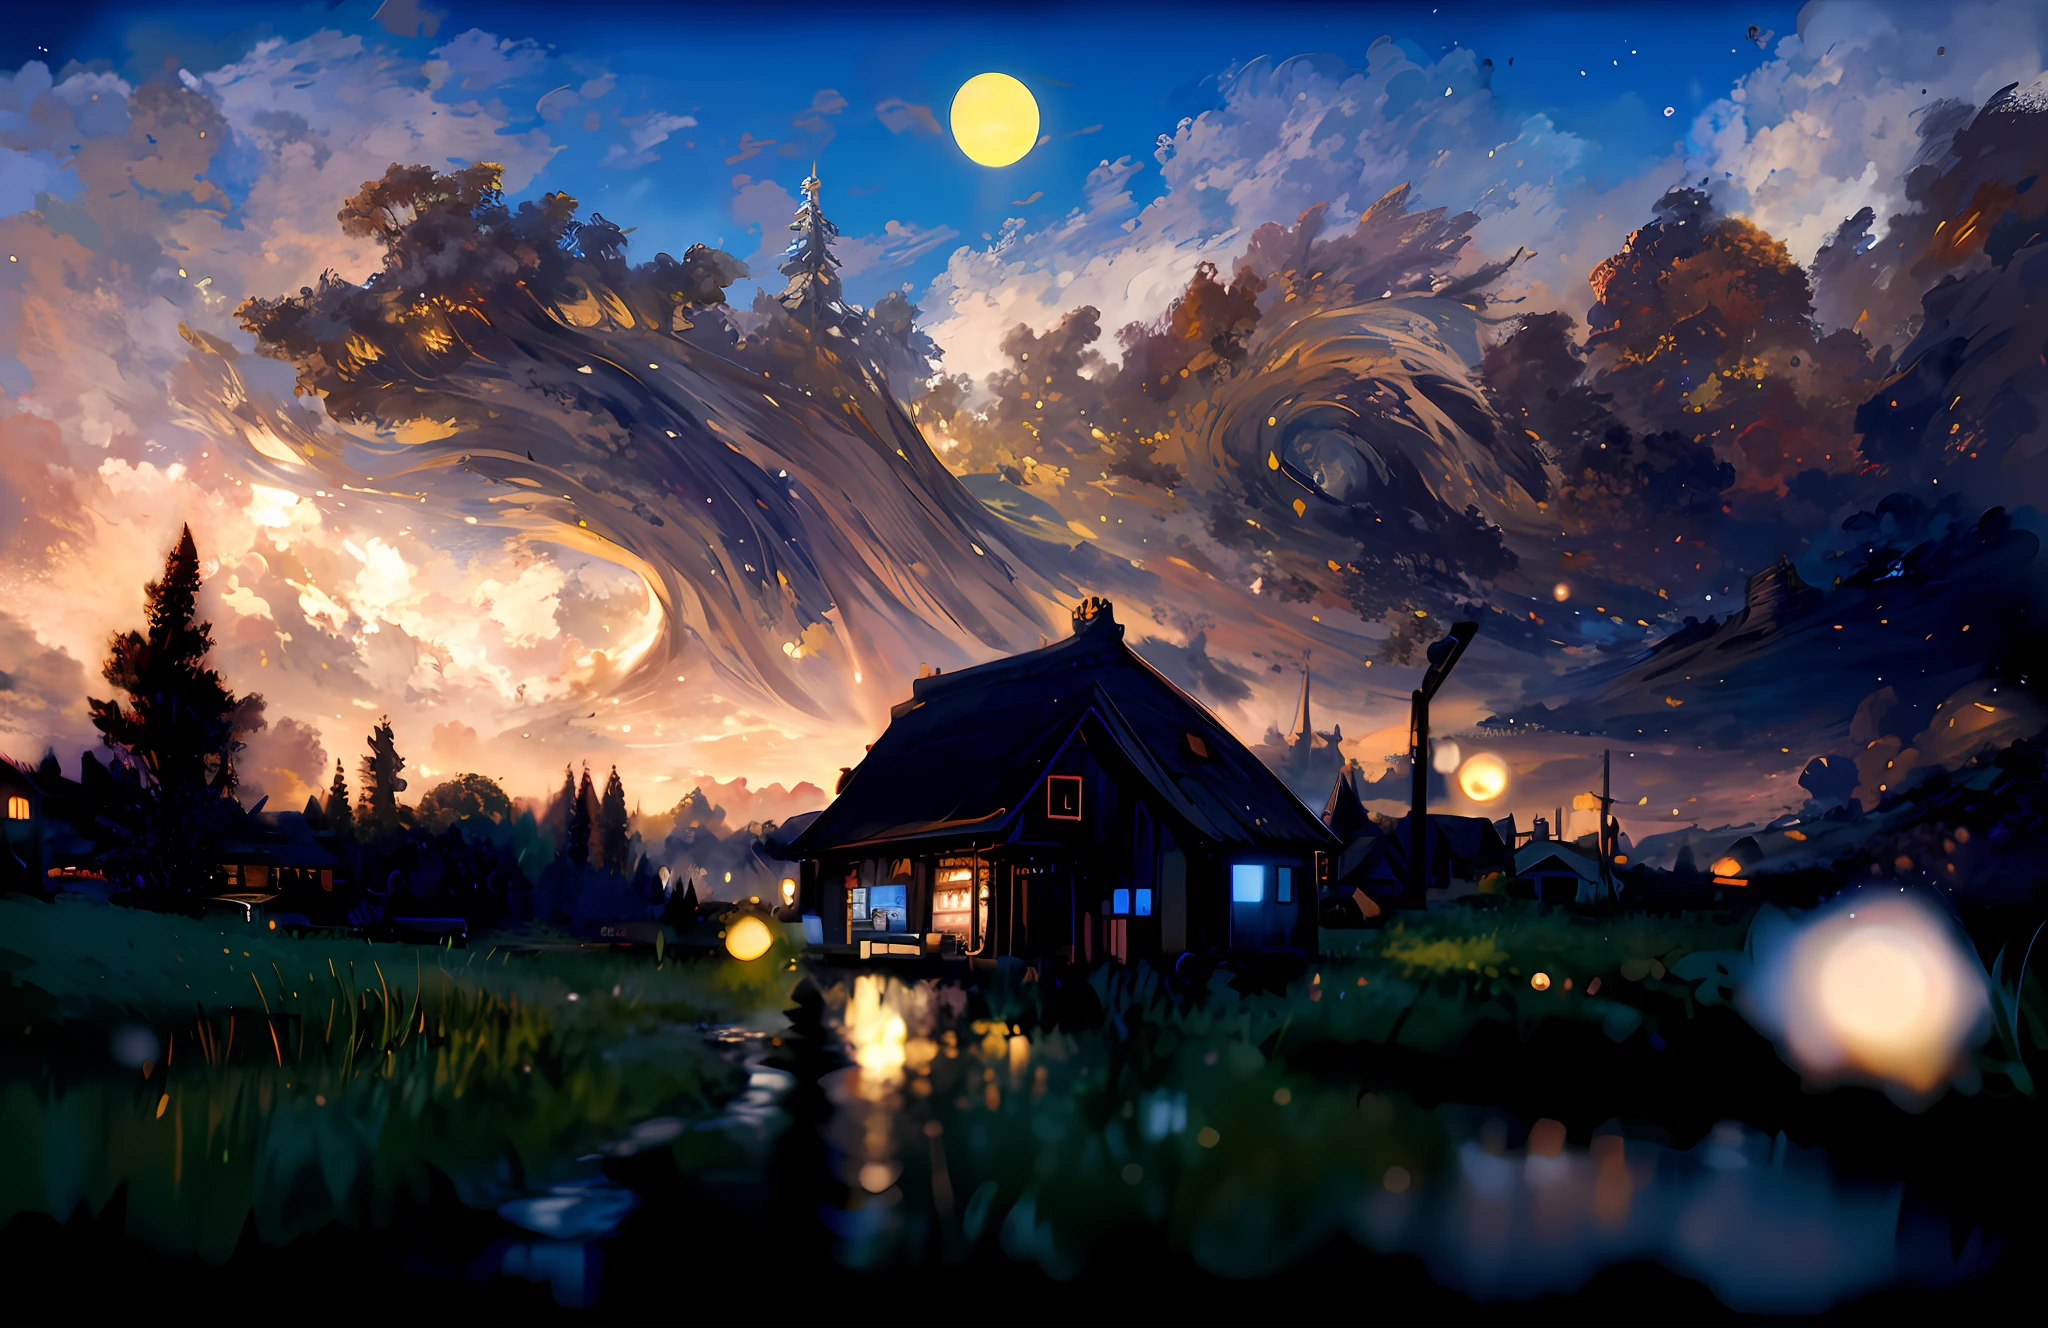 painting of a house in a field with a full moon in the background, 4k highly detailed digital art, highly detailed digital painting, detailed painting 4 k, digital painting highly detailed, beautiful art uhd 4 k, calm night. digital illustration, dreamlike digital painting, stunning art style, 4k detailed digital art, very detailed digital painting, anime art wallpaper 4 k --auto --s2